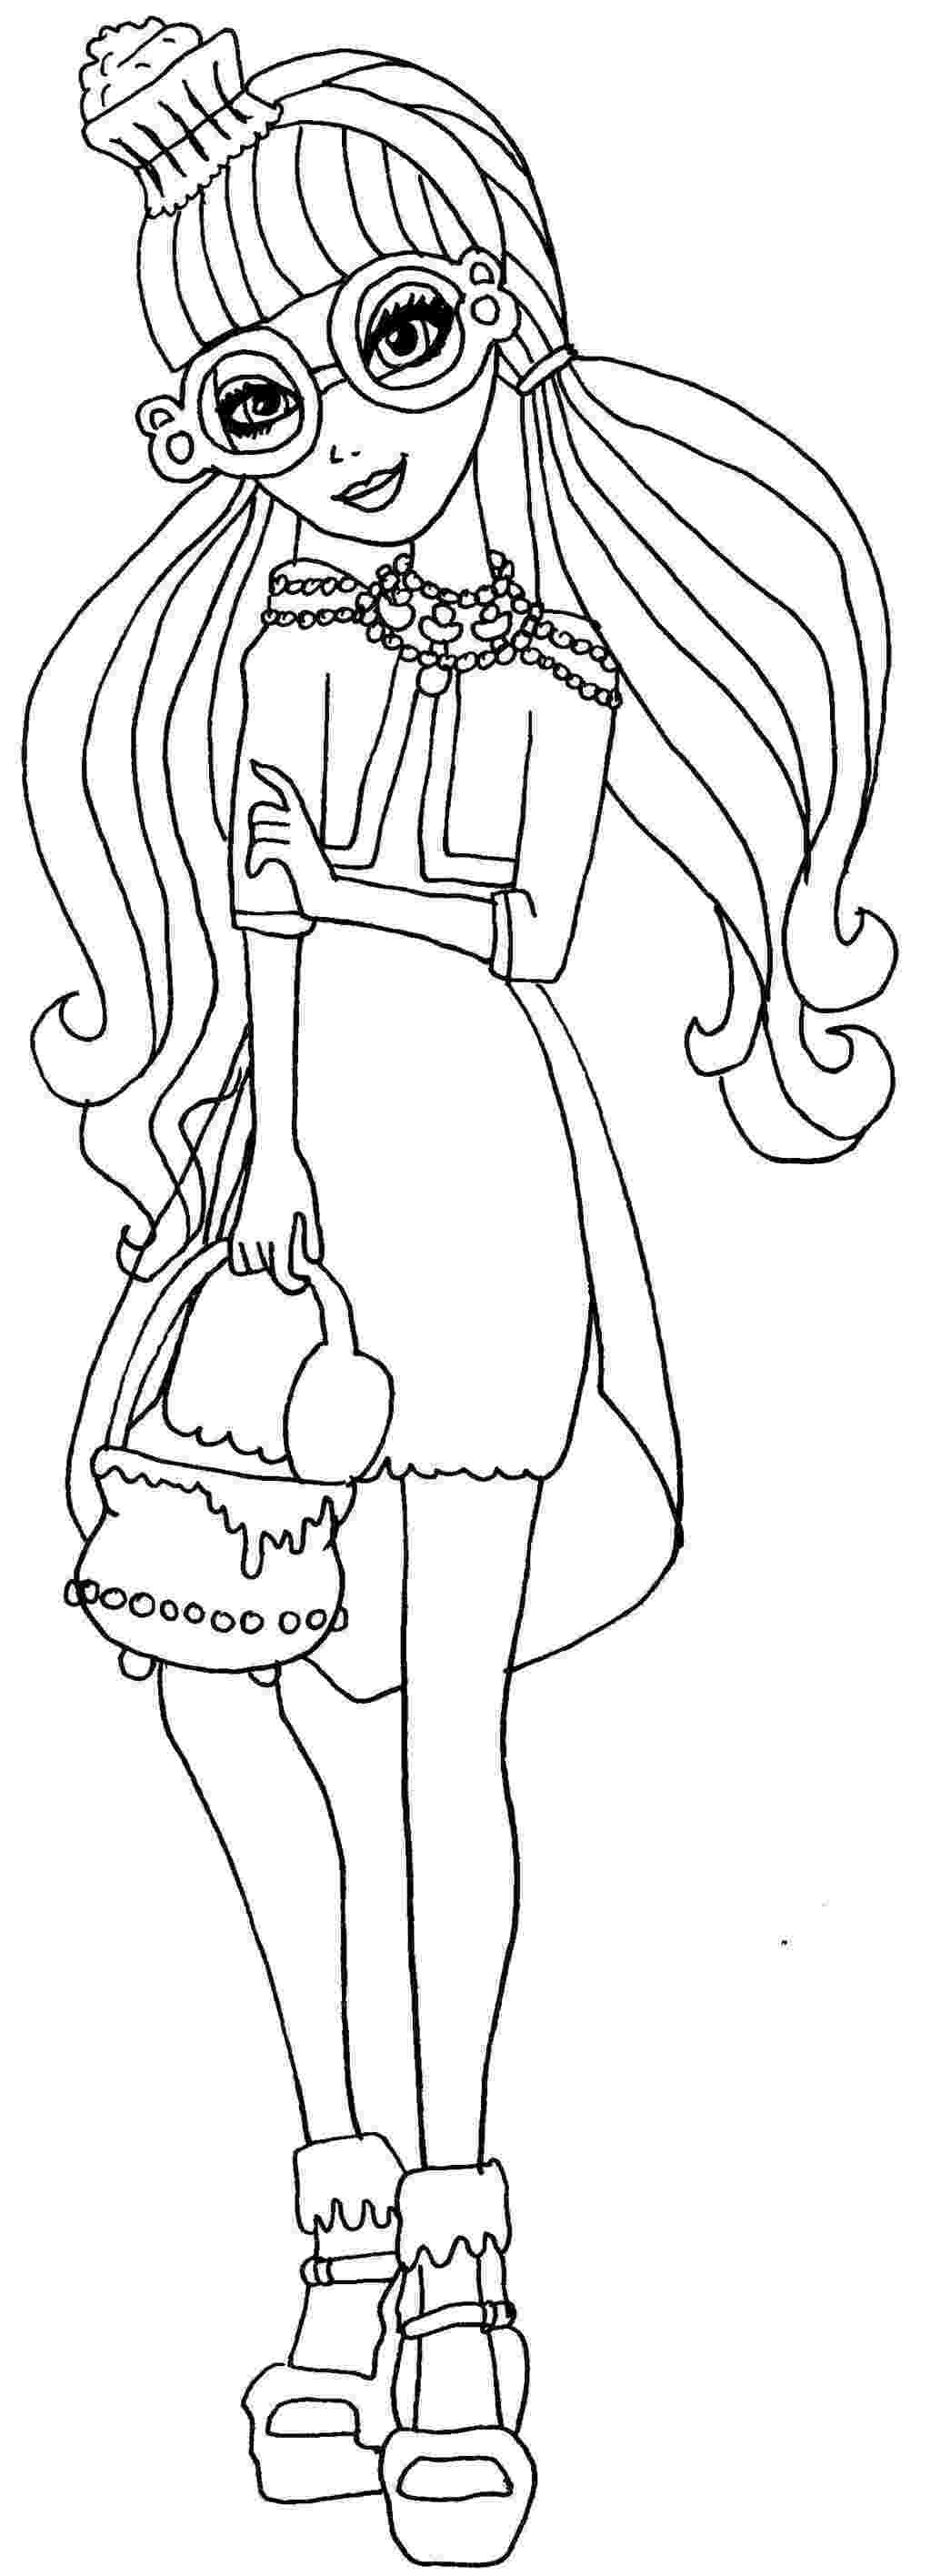 ever after high printables top 10 ever after high coloring pages after high ever printables 